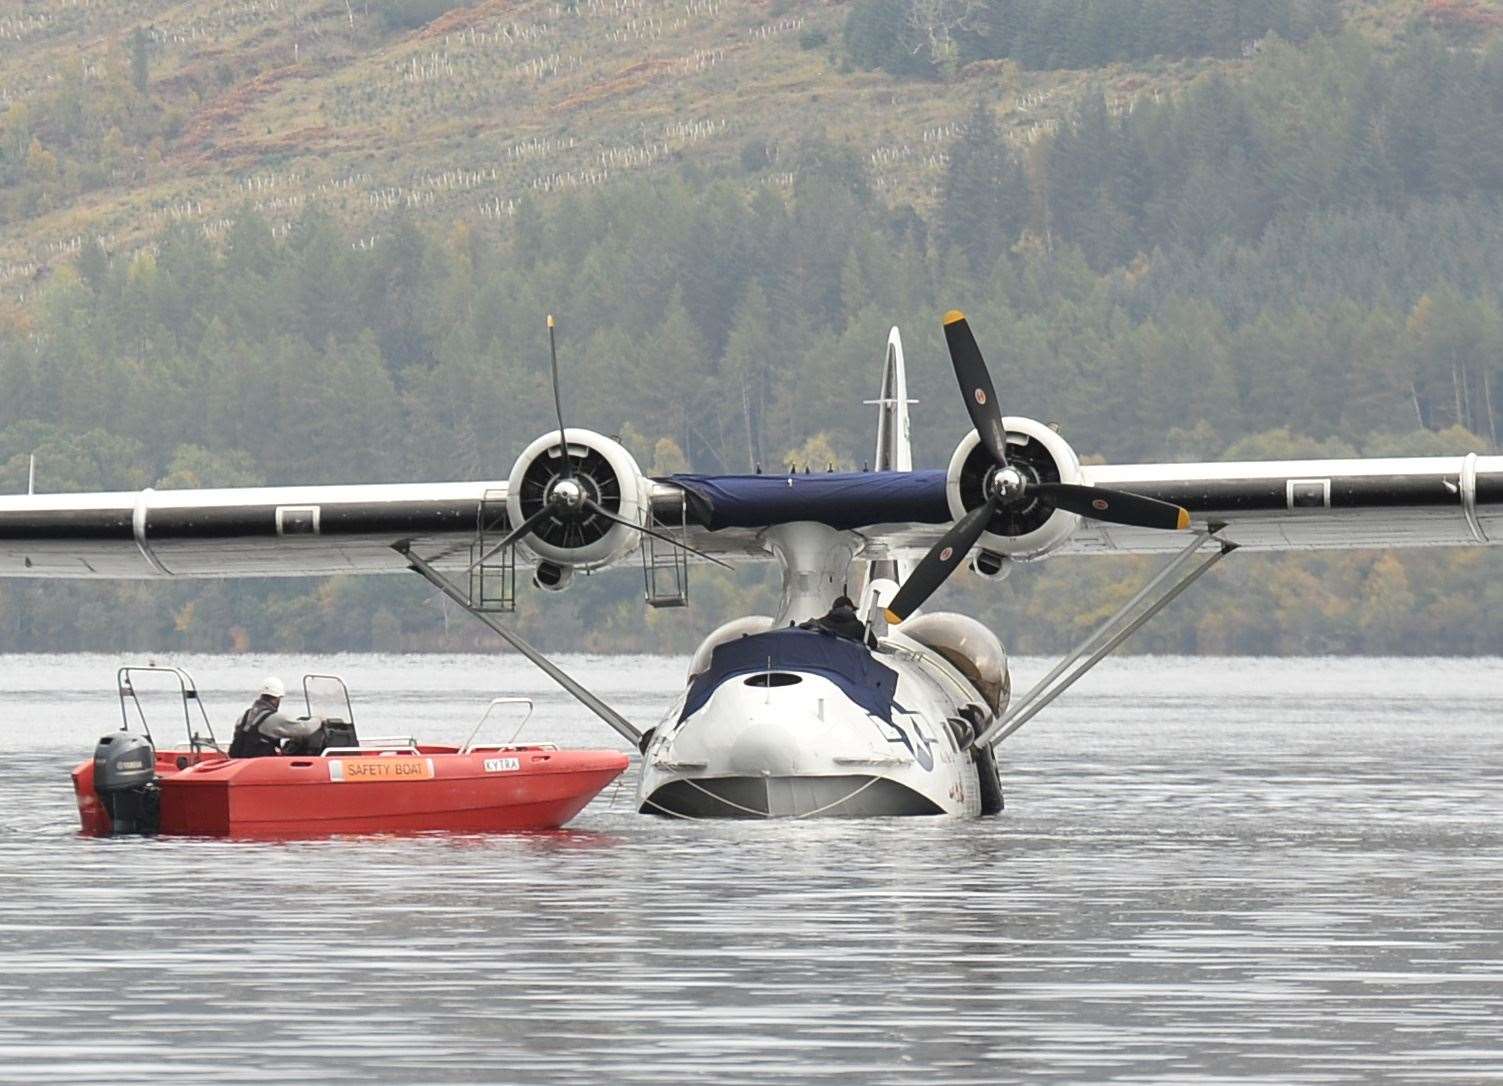 Sea plane lifted out of water at Temple Pier Loch Ness...Picture: Gary Anthony..